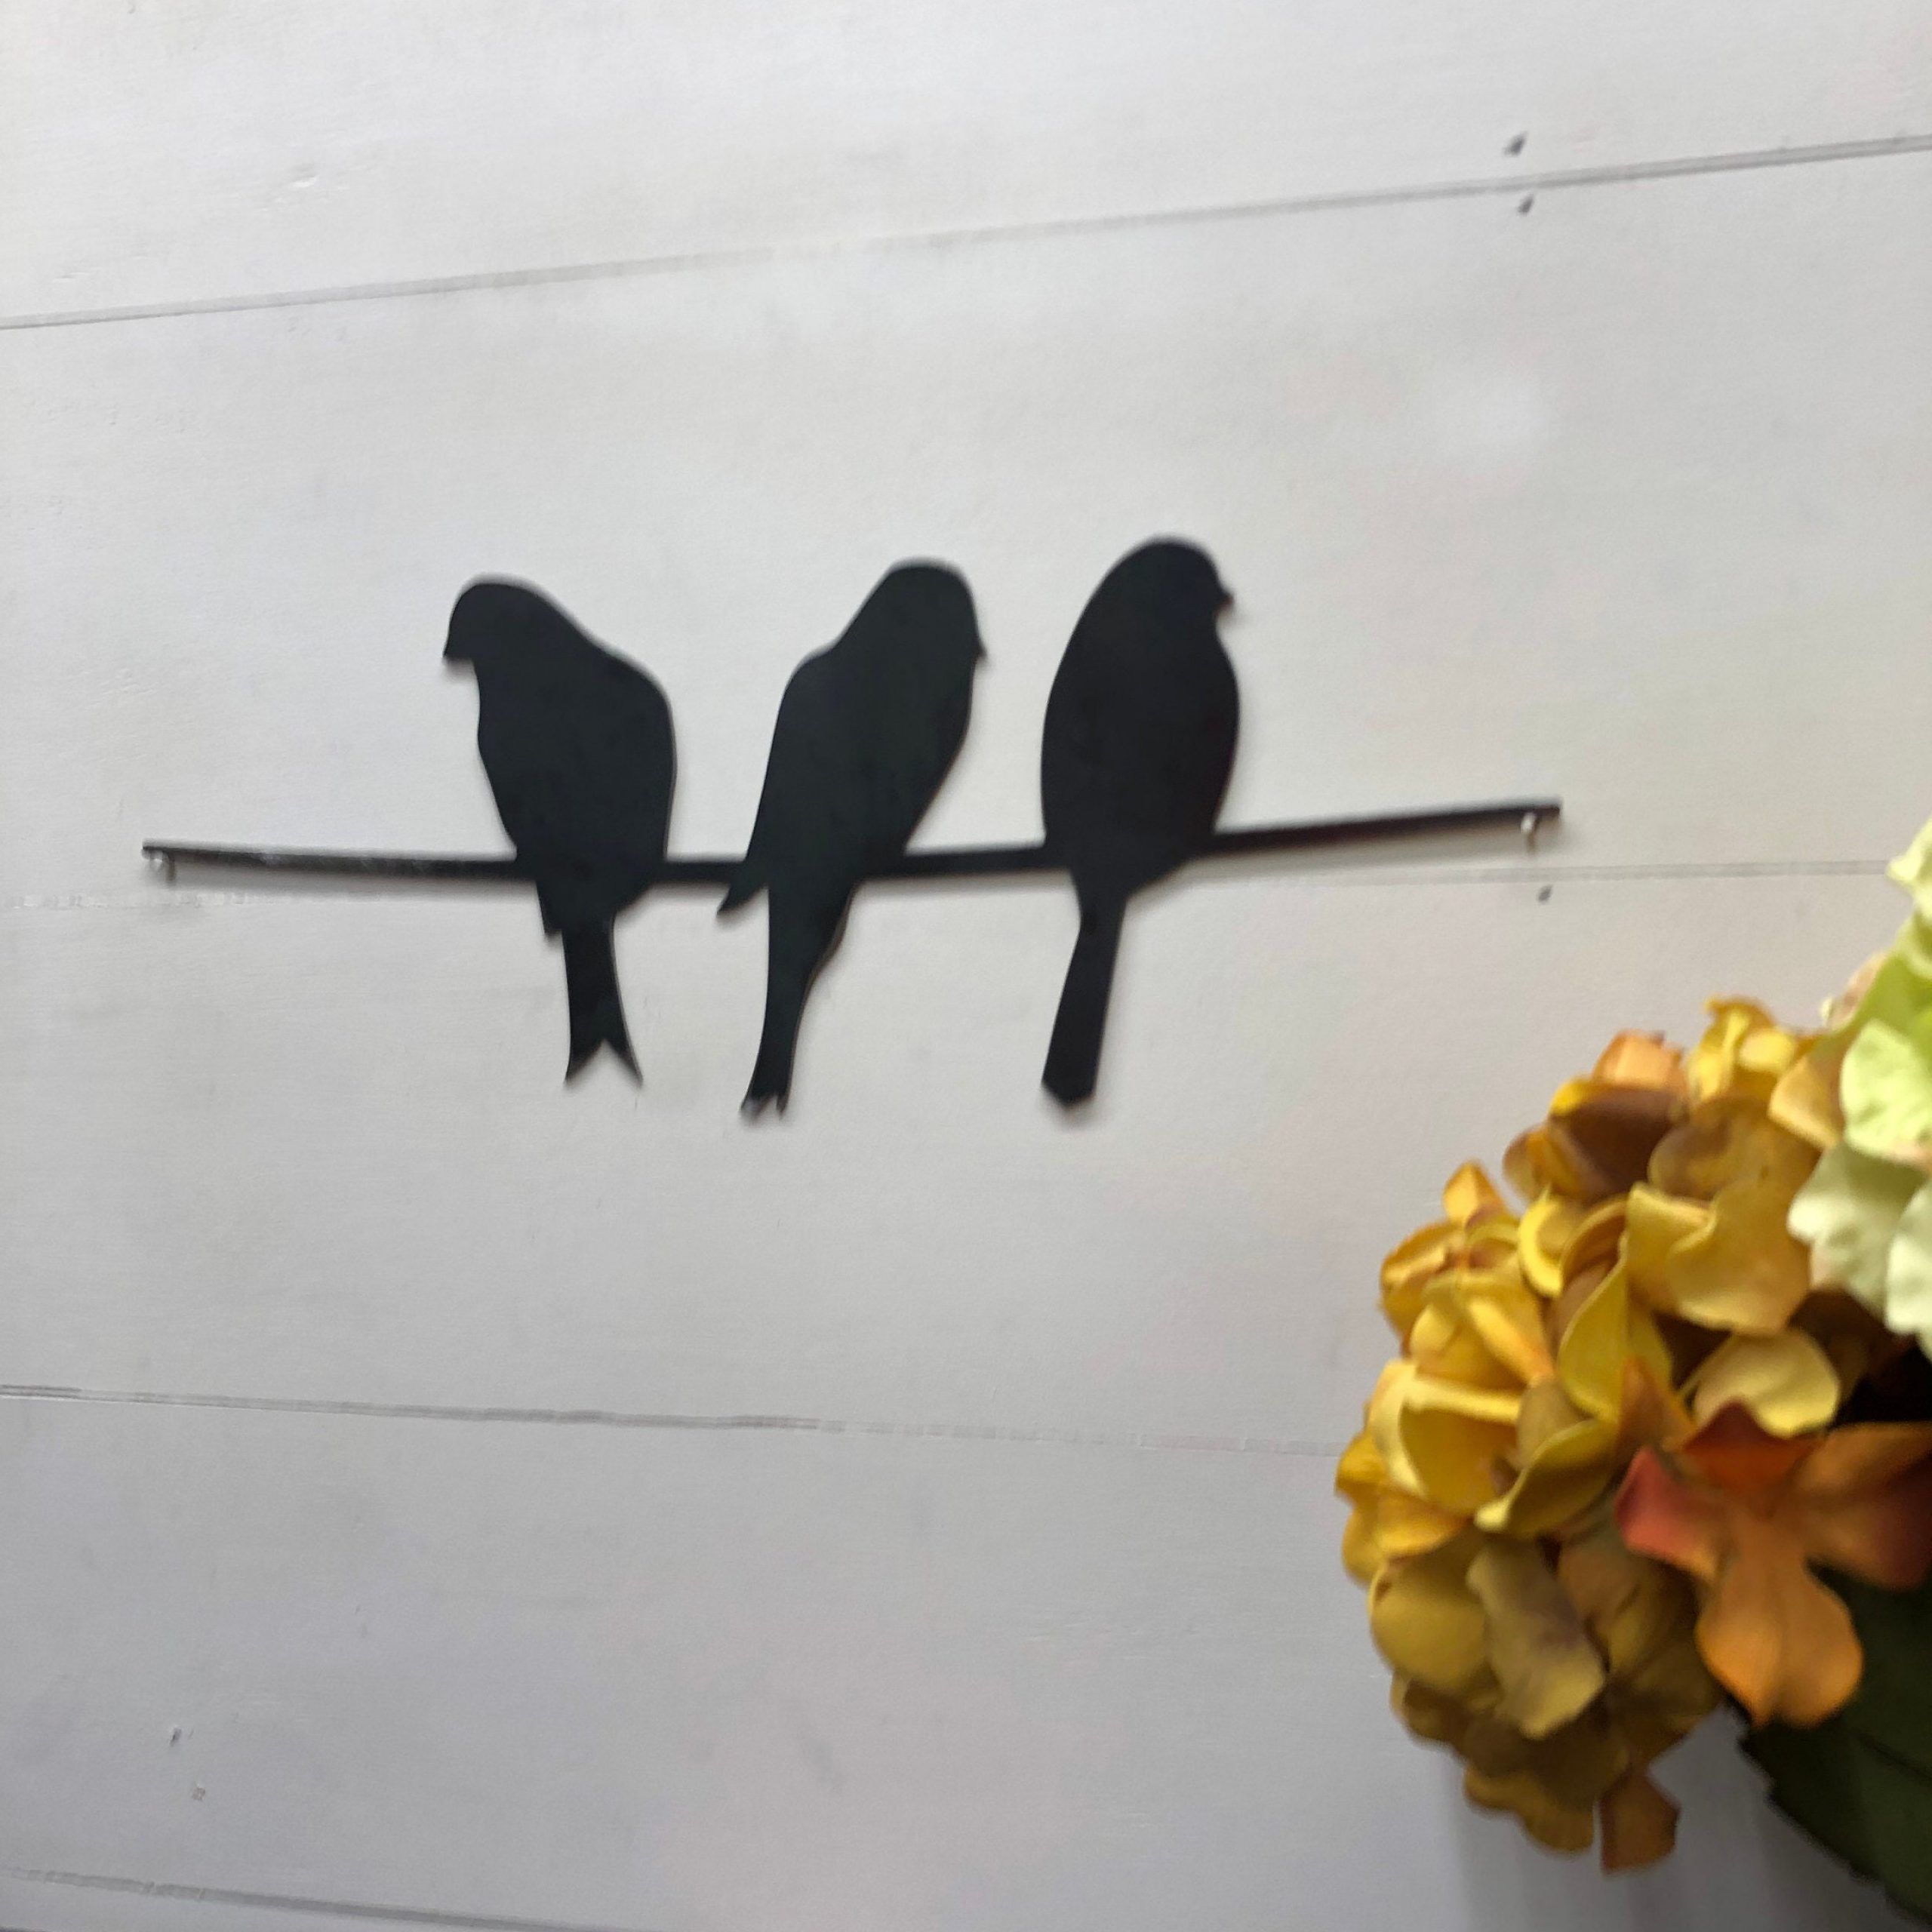 Best And Newest Small Metal Birds On A Wire Home Decor, Bird Wall Art, Birds On Wire Within Birds Metal Wall Art (View 11 of 15)